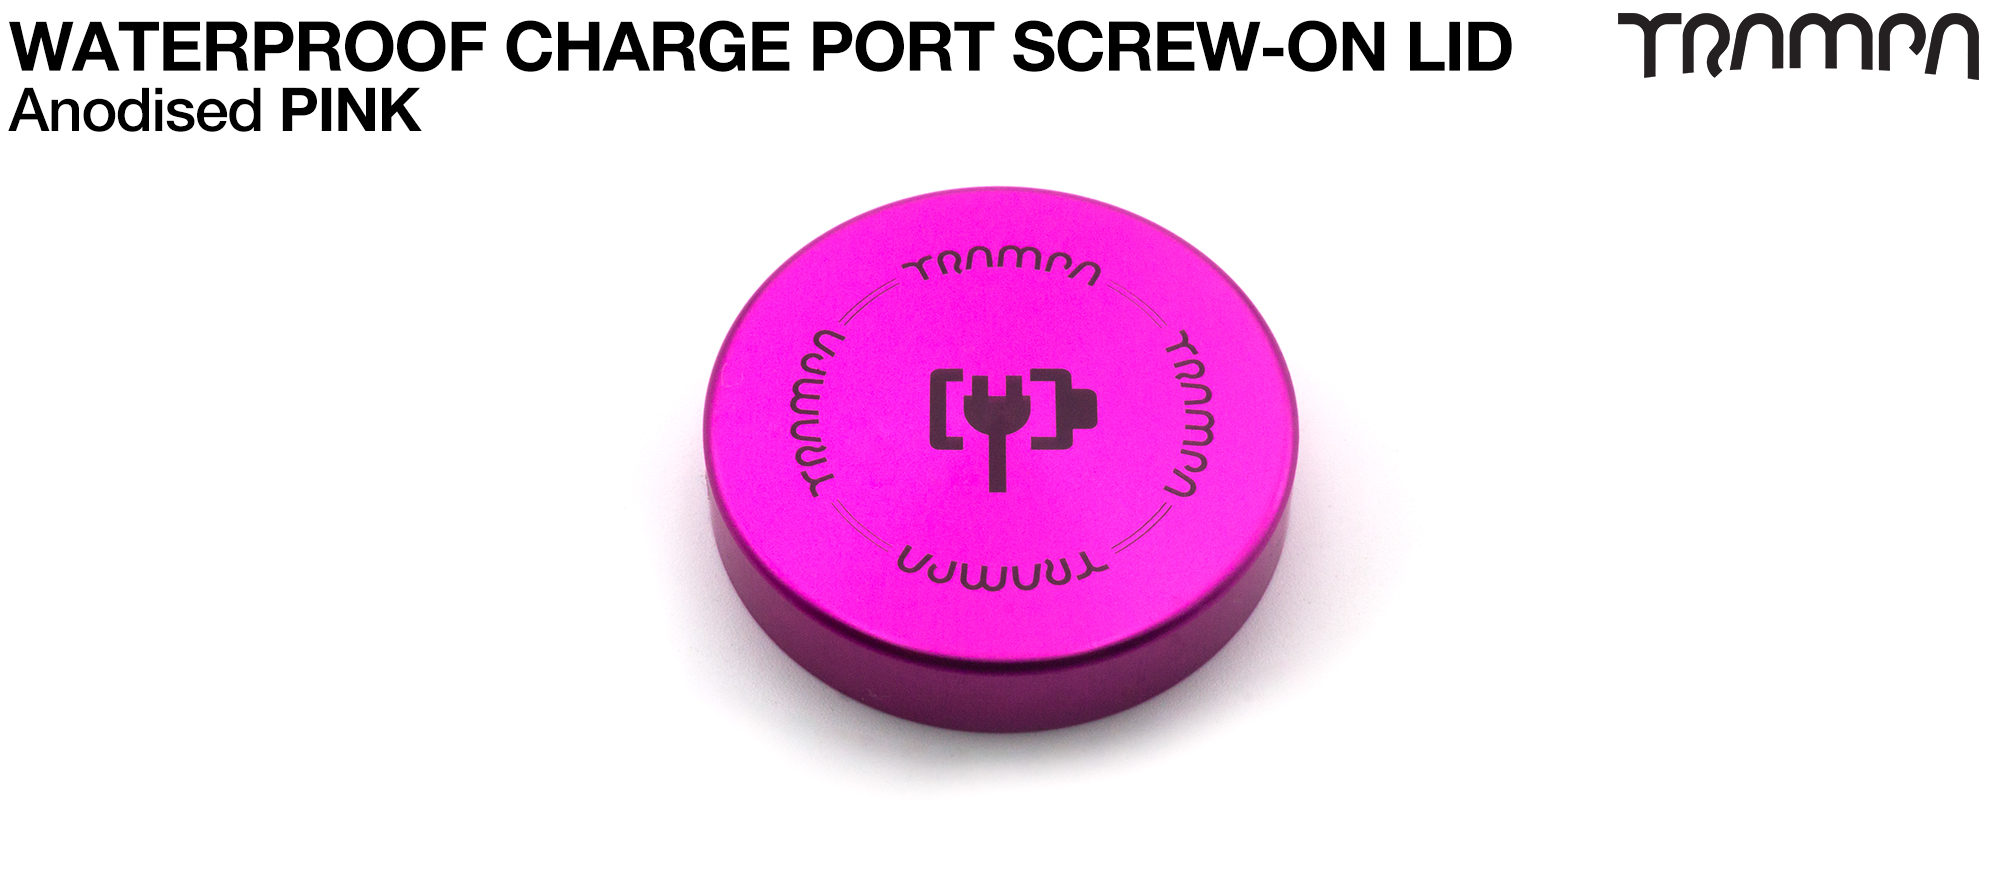 14FIFTIES Charge Point TOP - Anodised PINK